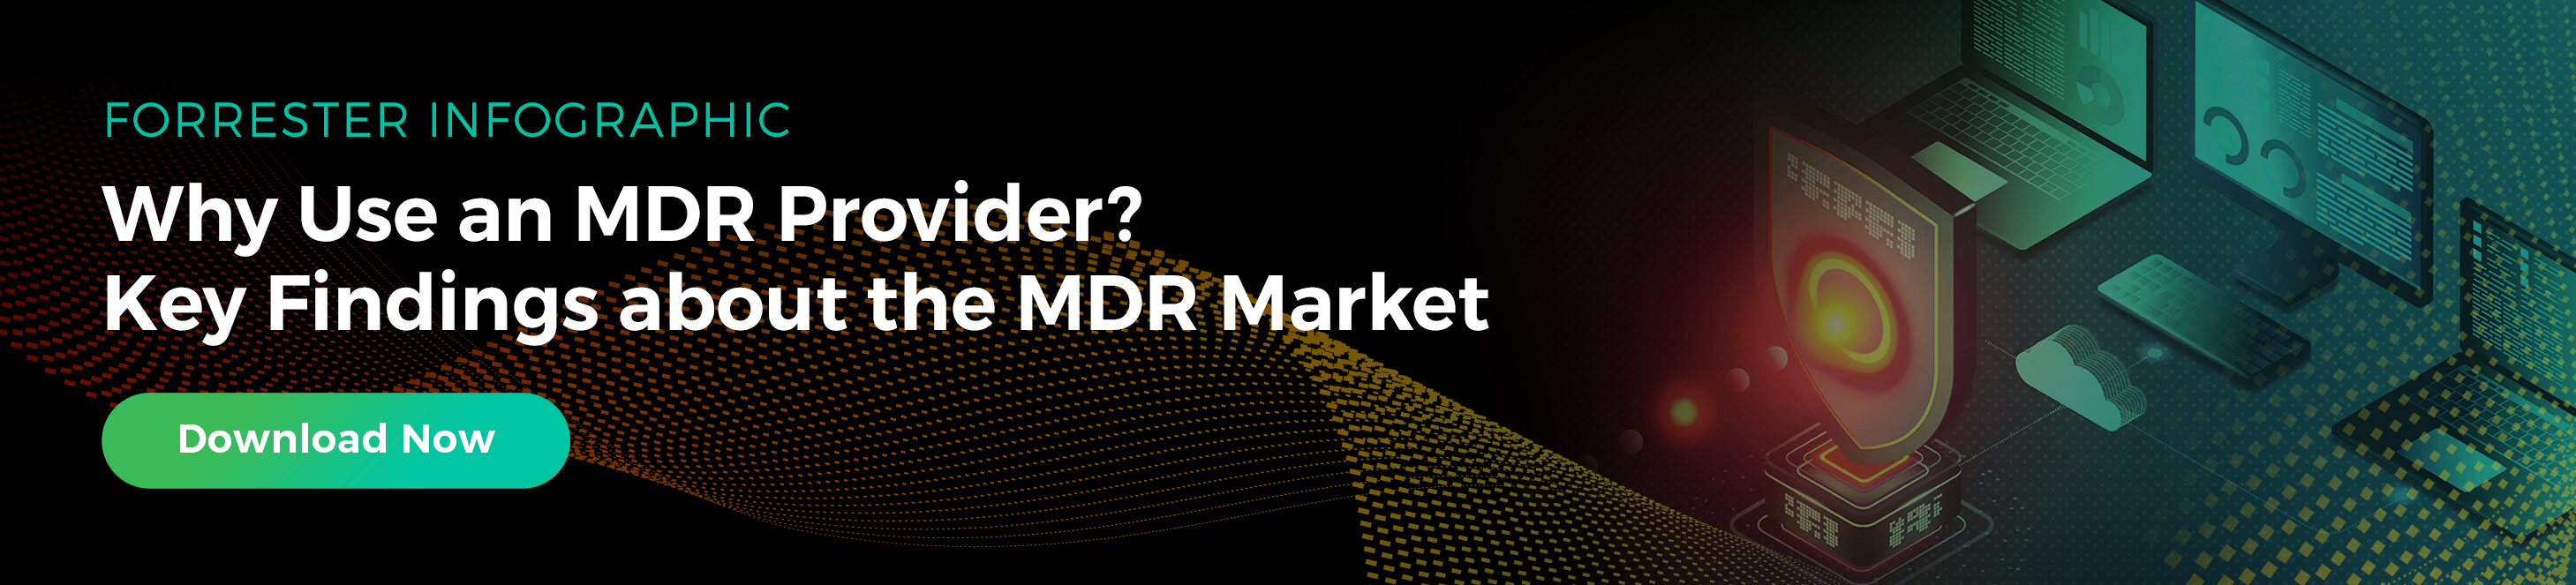 Why use an MDR provider?